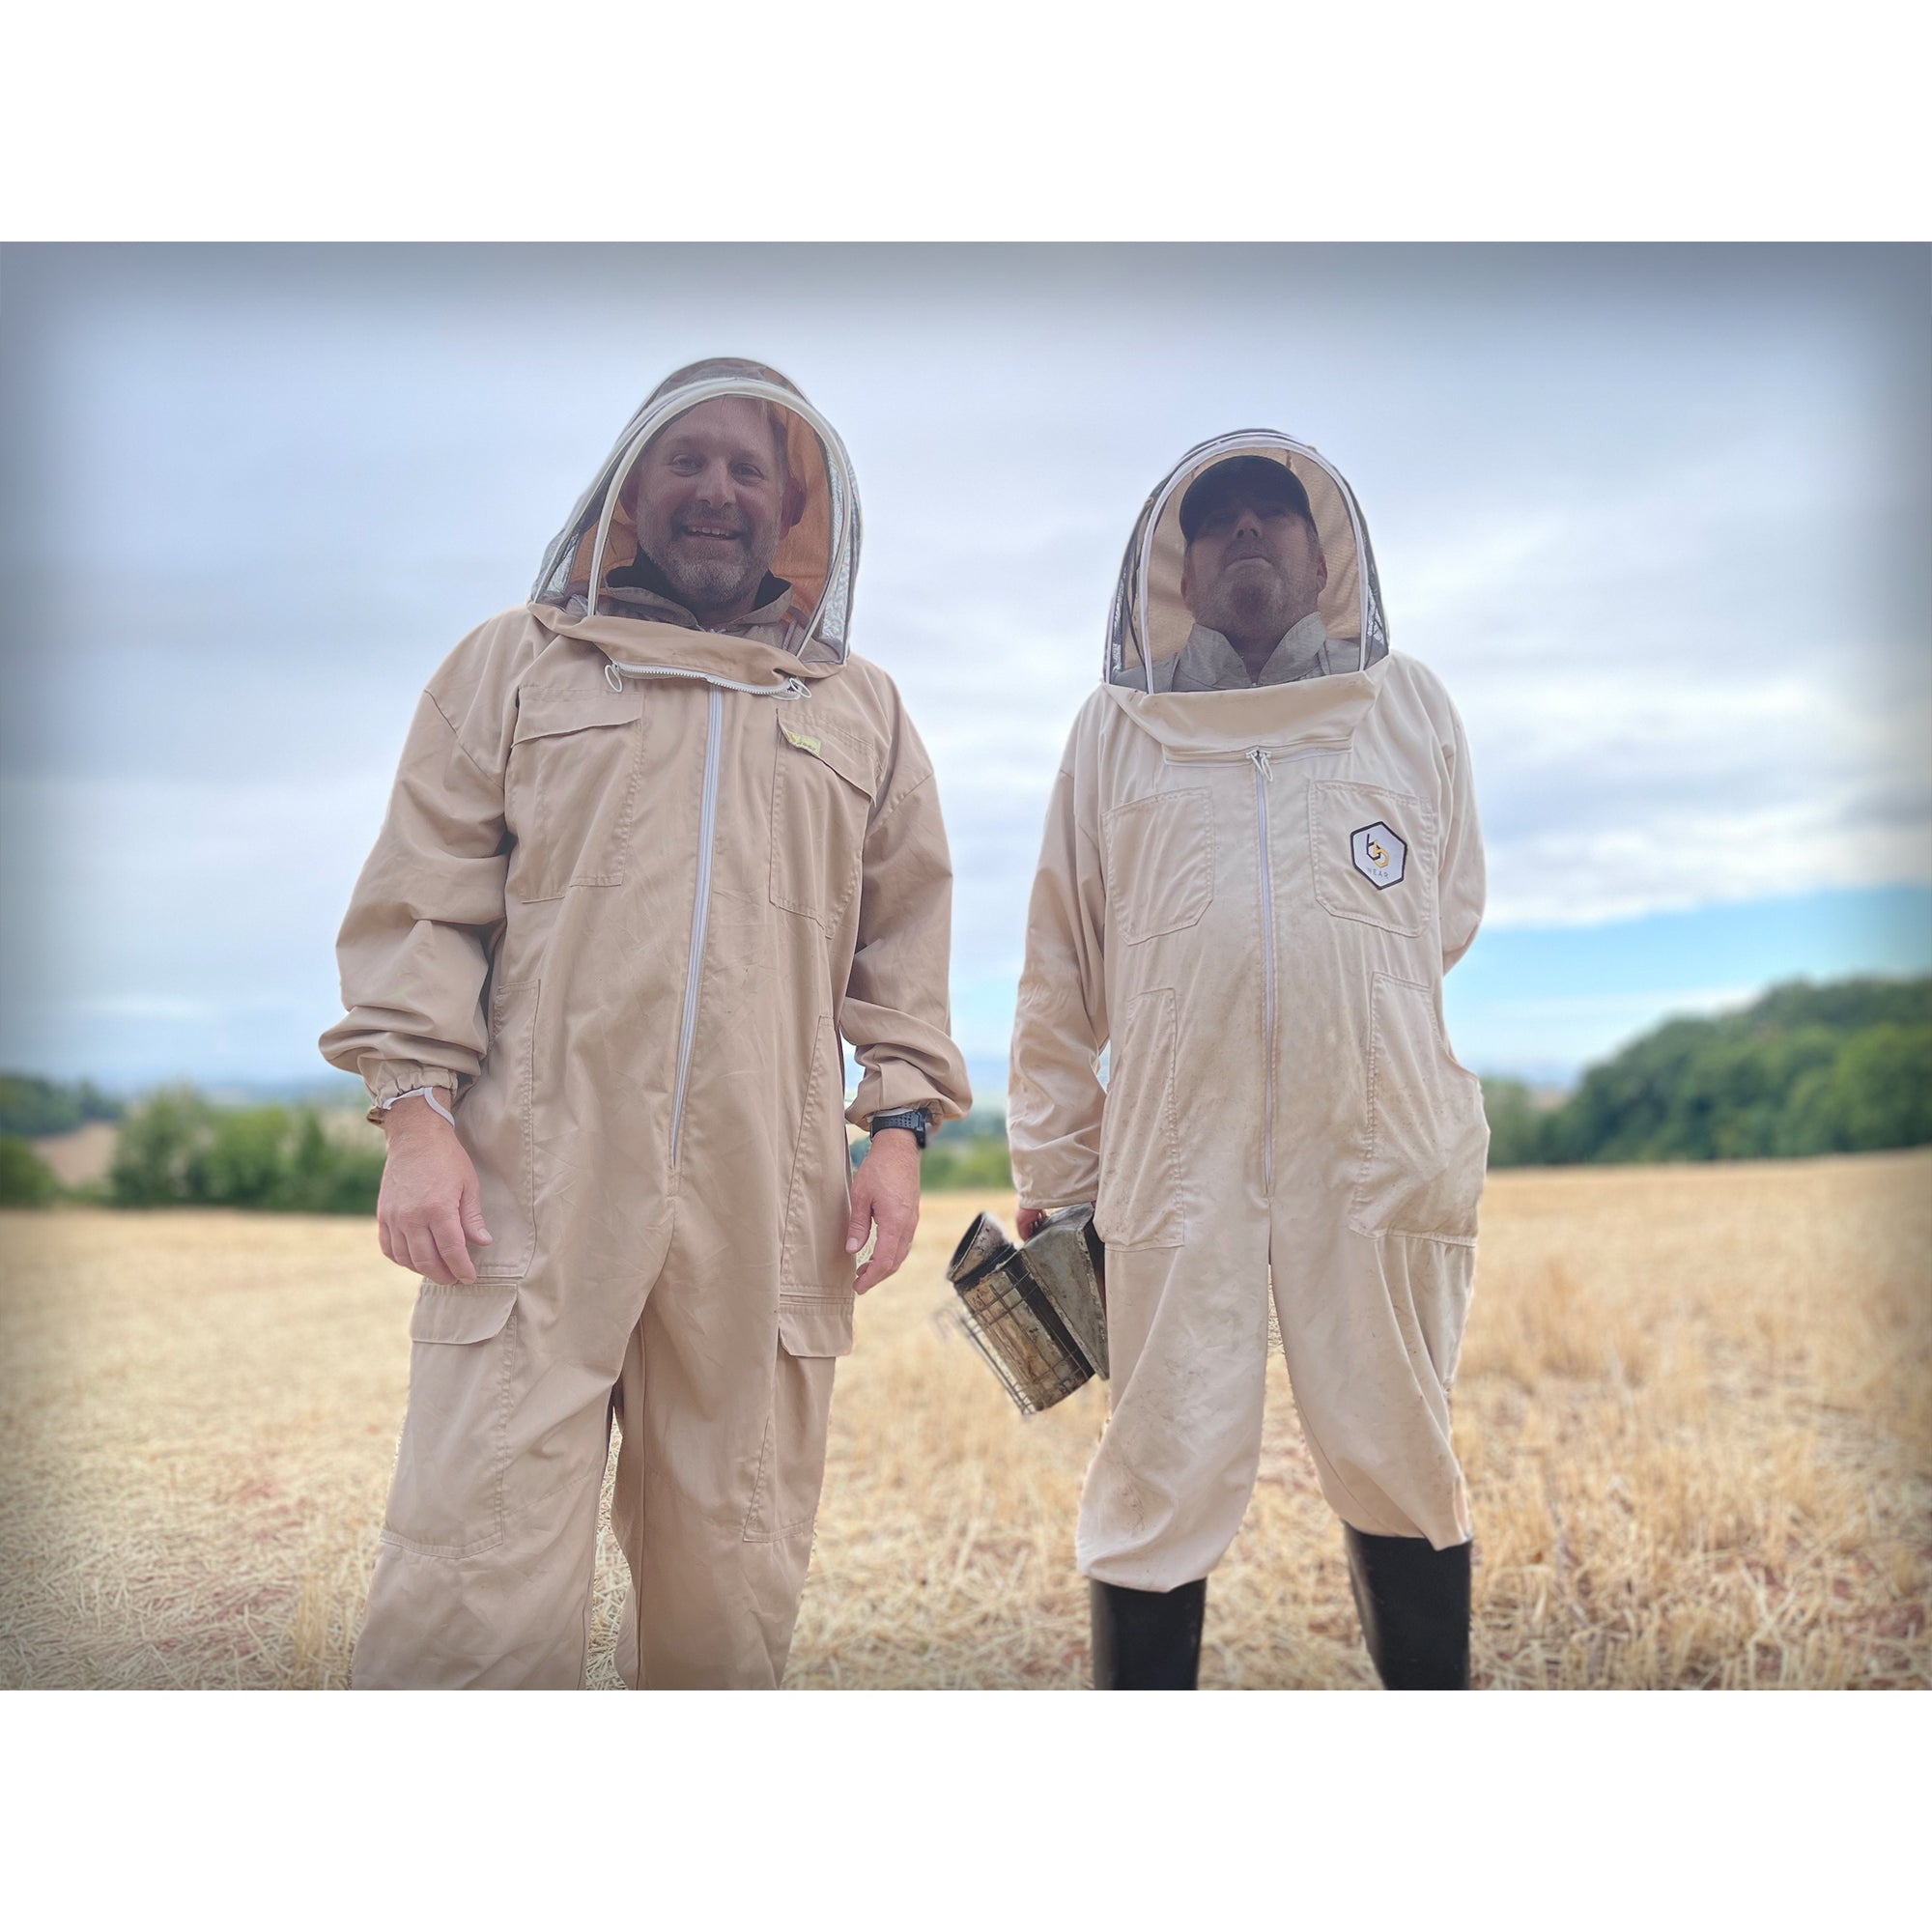 Neil and Simoon in Beekeeping suits 